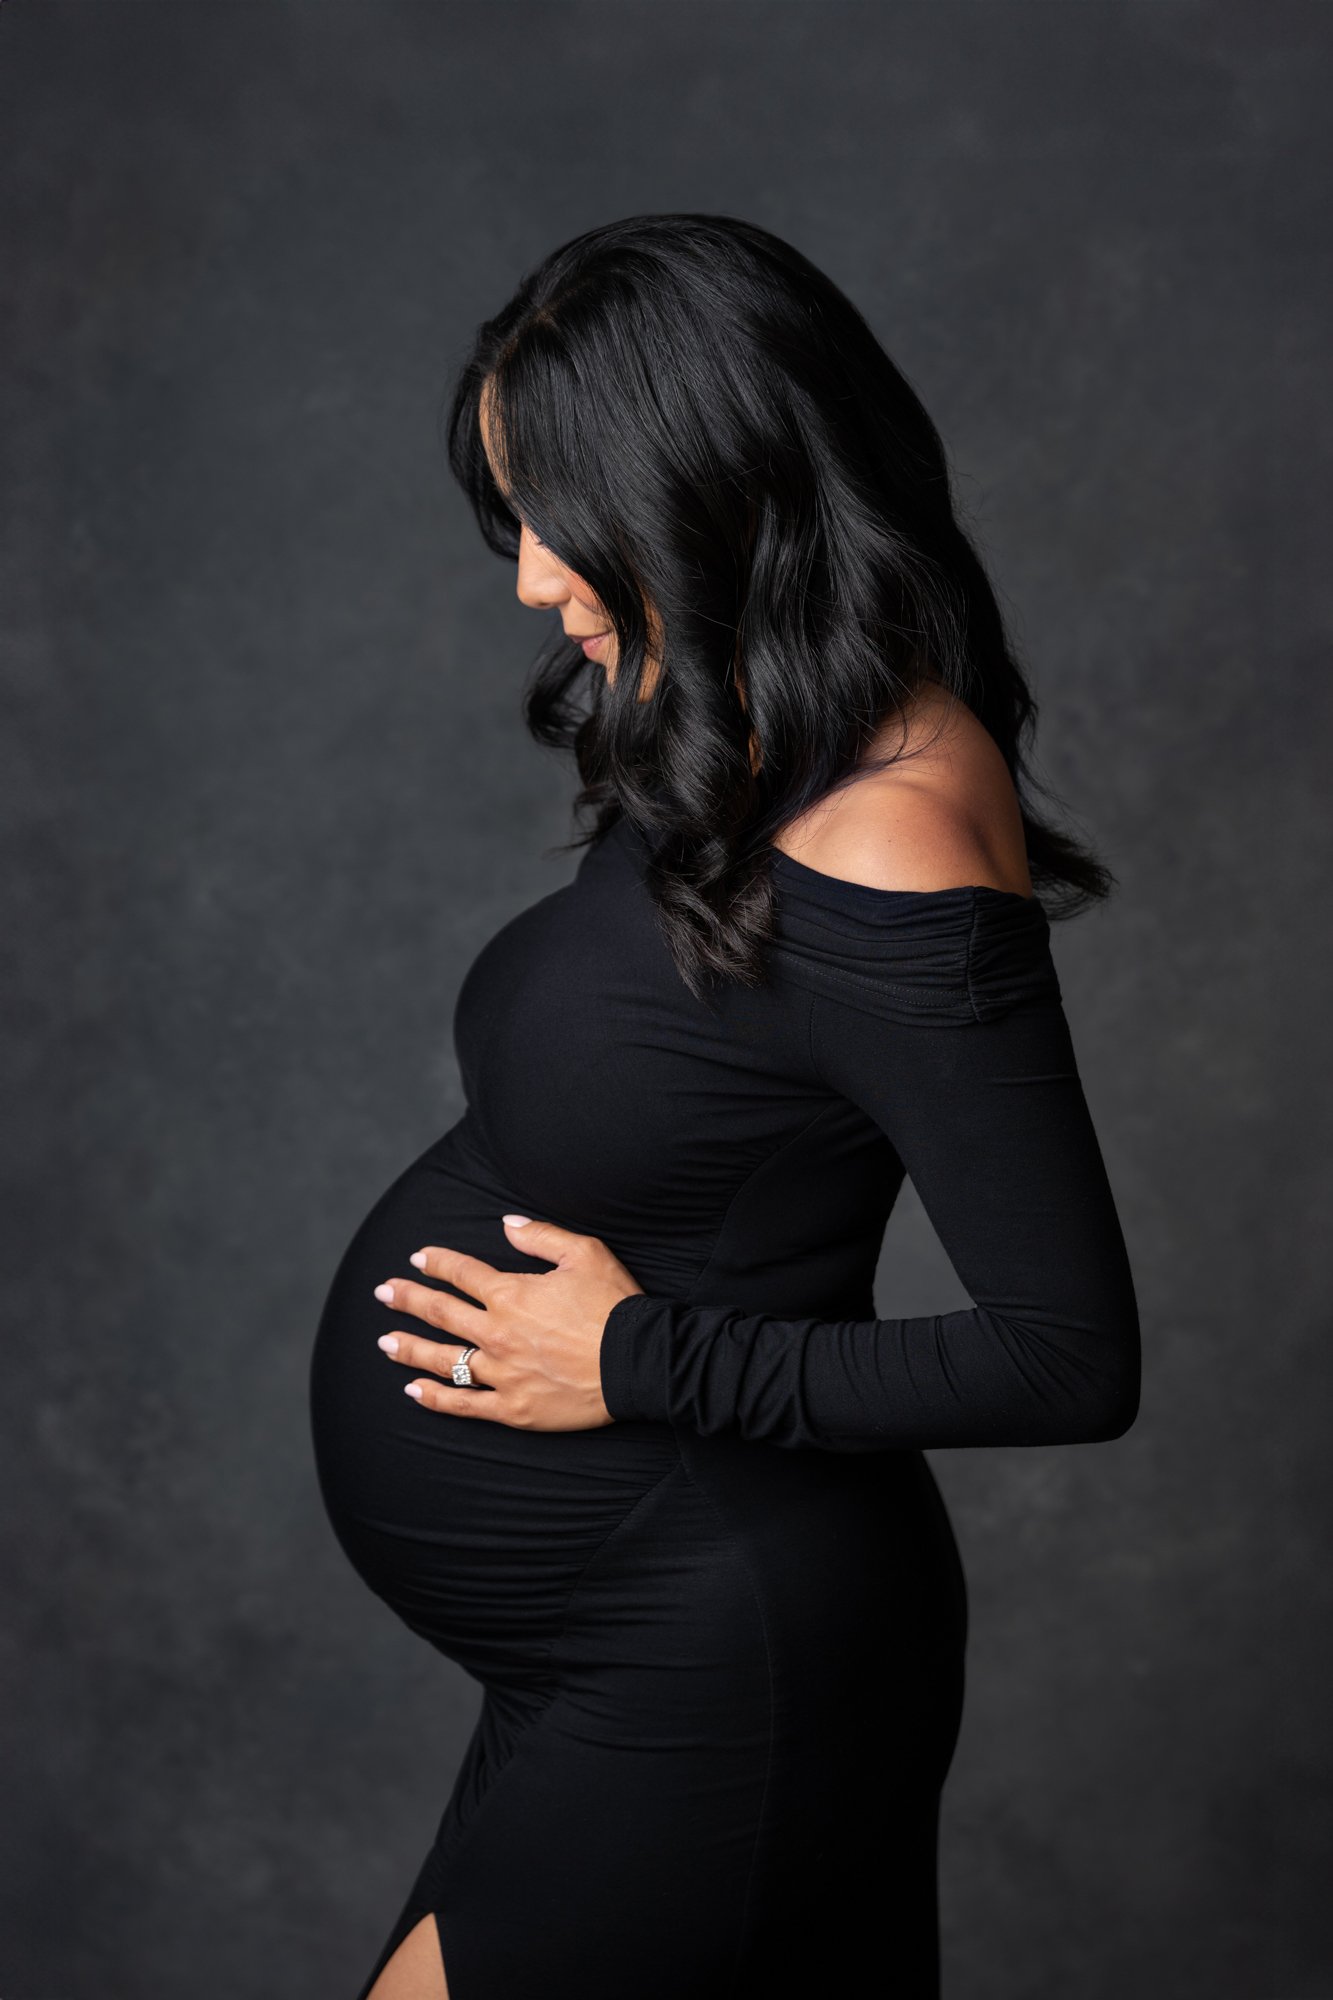  Stunning mother wears a fitted black dress to show off her baby bump in her studio maternity photography session in New Jersey. #southorange #newjerseyphotographers #maternitysession #maternityposeinspo #studiophotography #formalmaternitystyle #casu